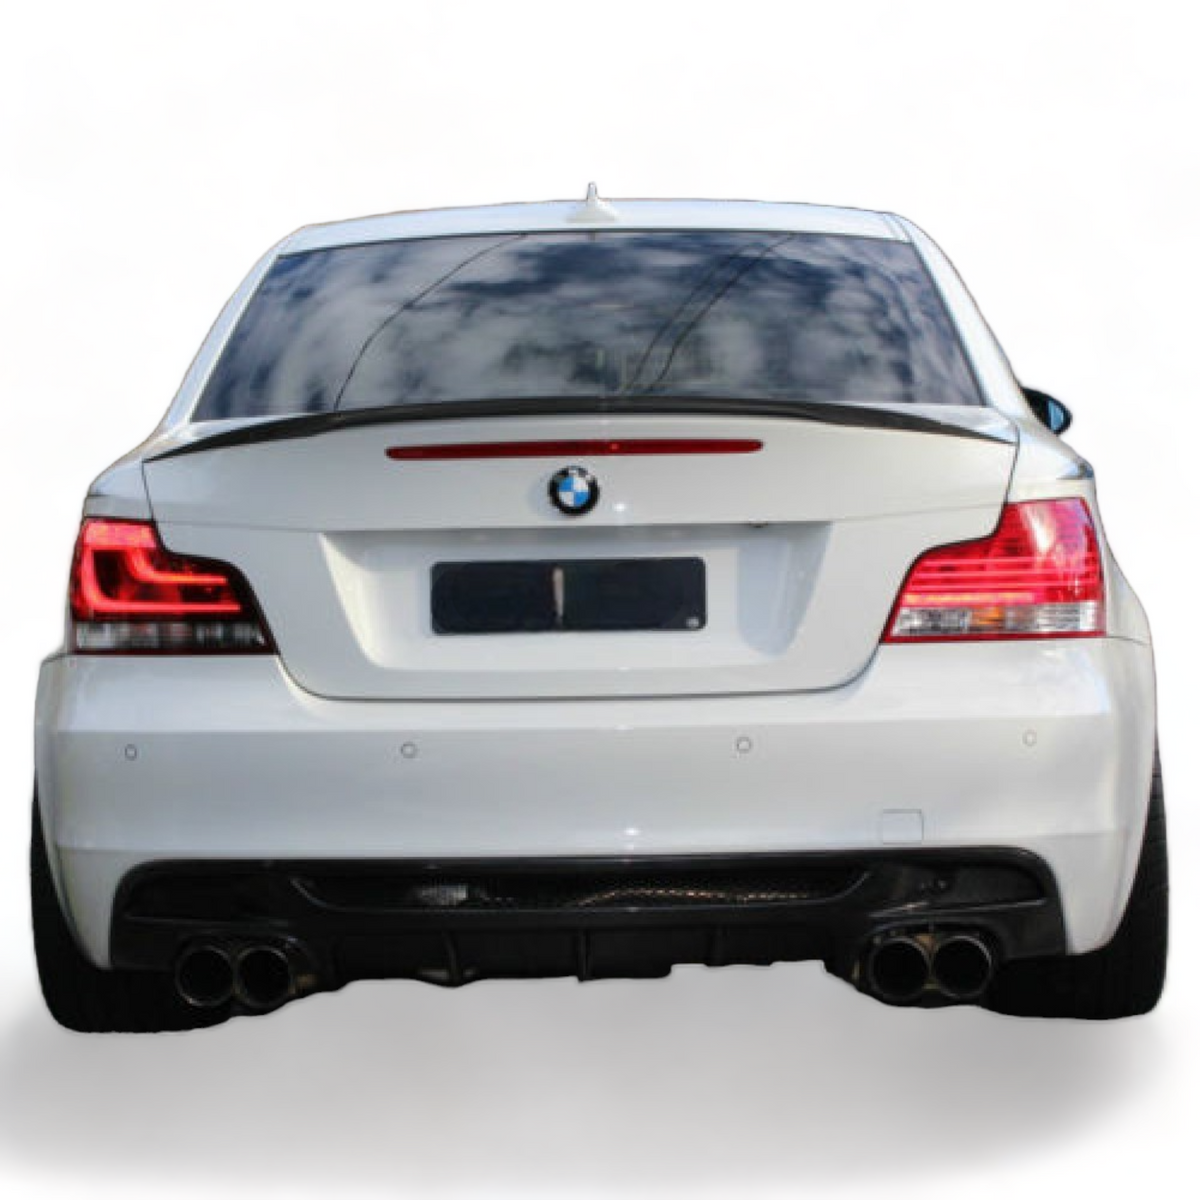 BMW E82 ABS Boot spoiler 1 Series coupe rear performance